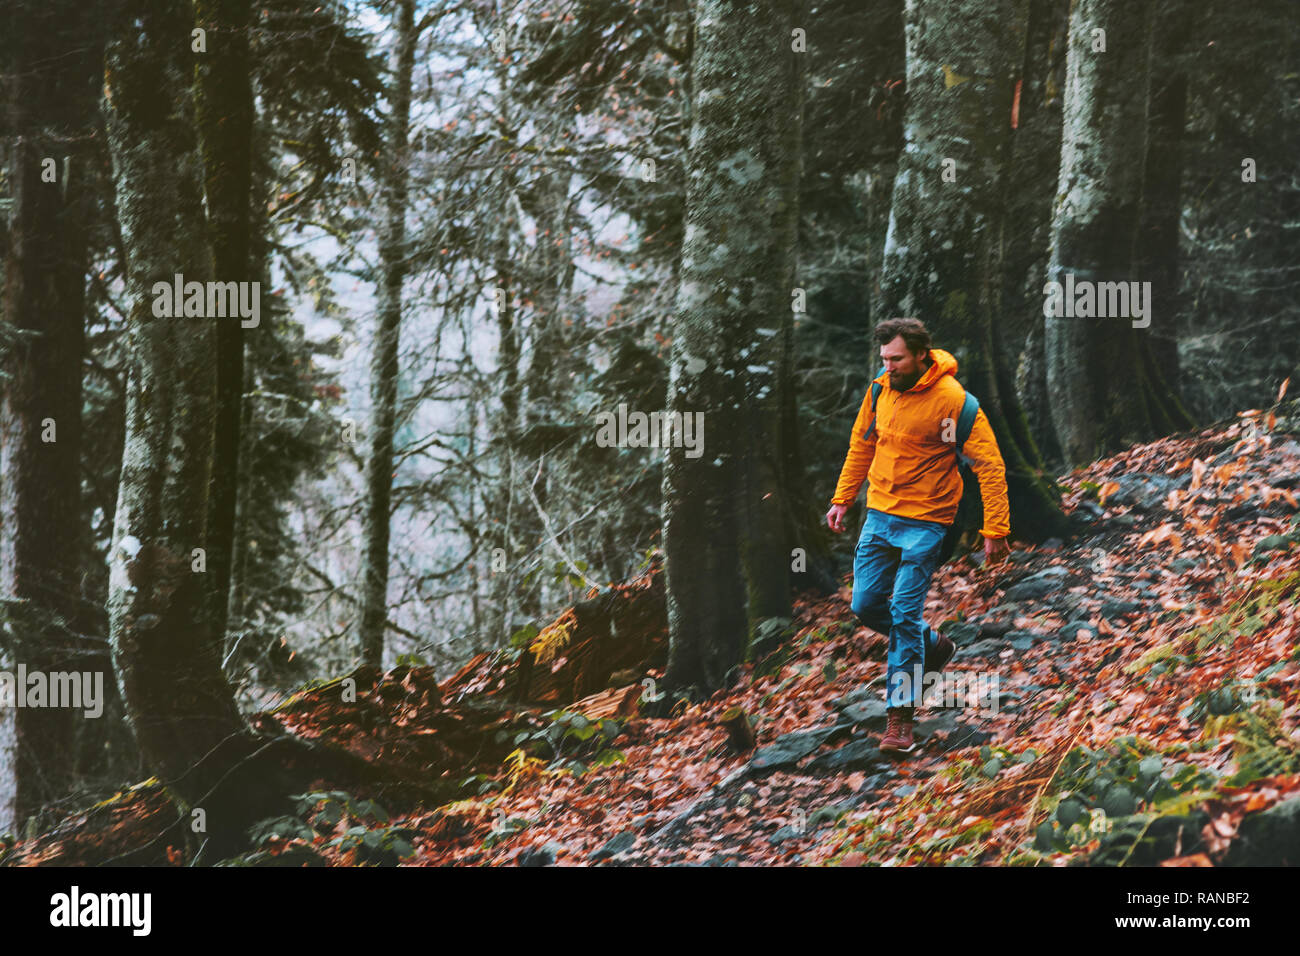 Man running in forest Travel healthy lifestyle adventure active vacations survival outdoor Stock Photo